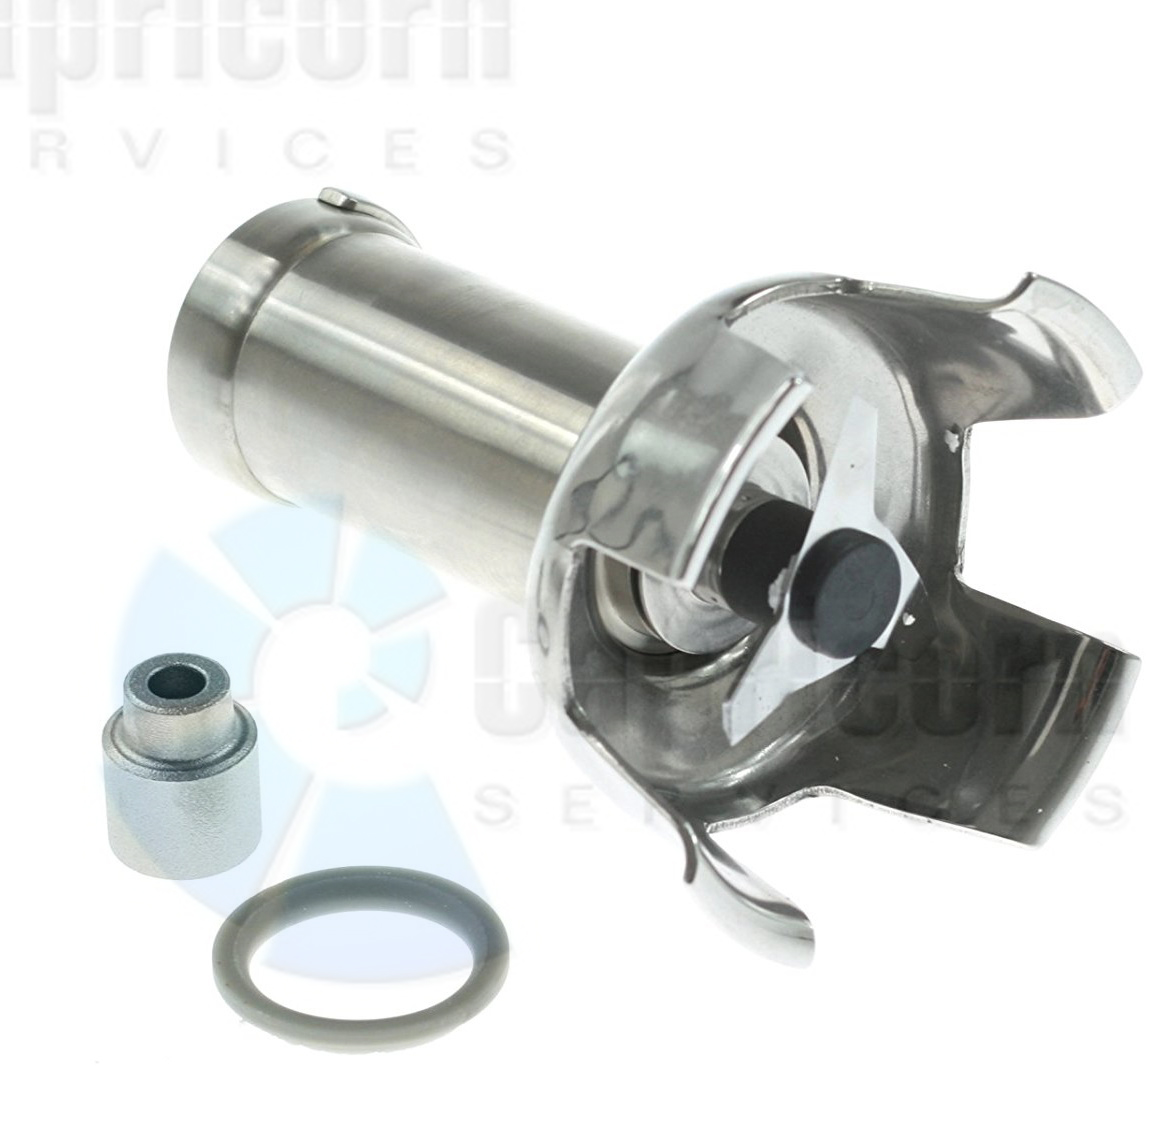 ROBOT COUPE MP 550 C - STAINLESS BELL ASSEMBLY 39344 - Robot Coupe Machines Spare Parts